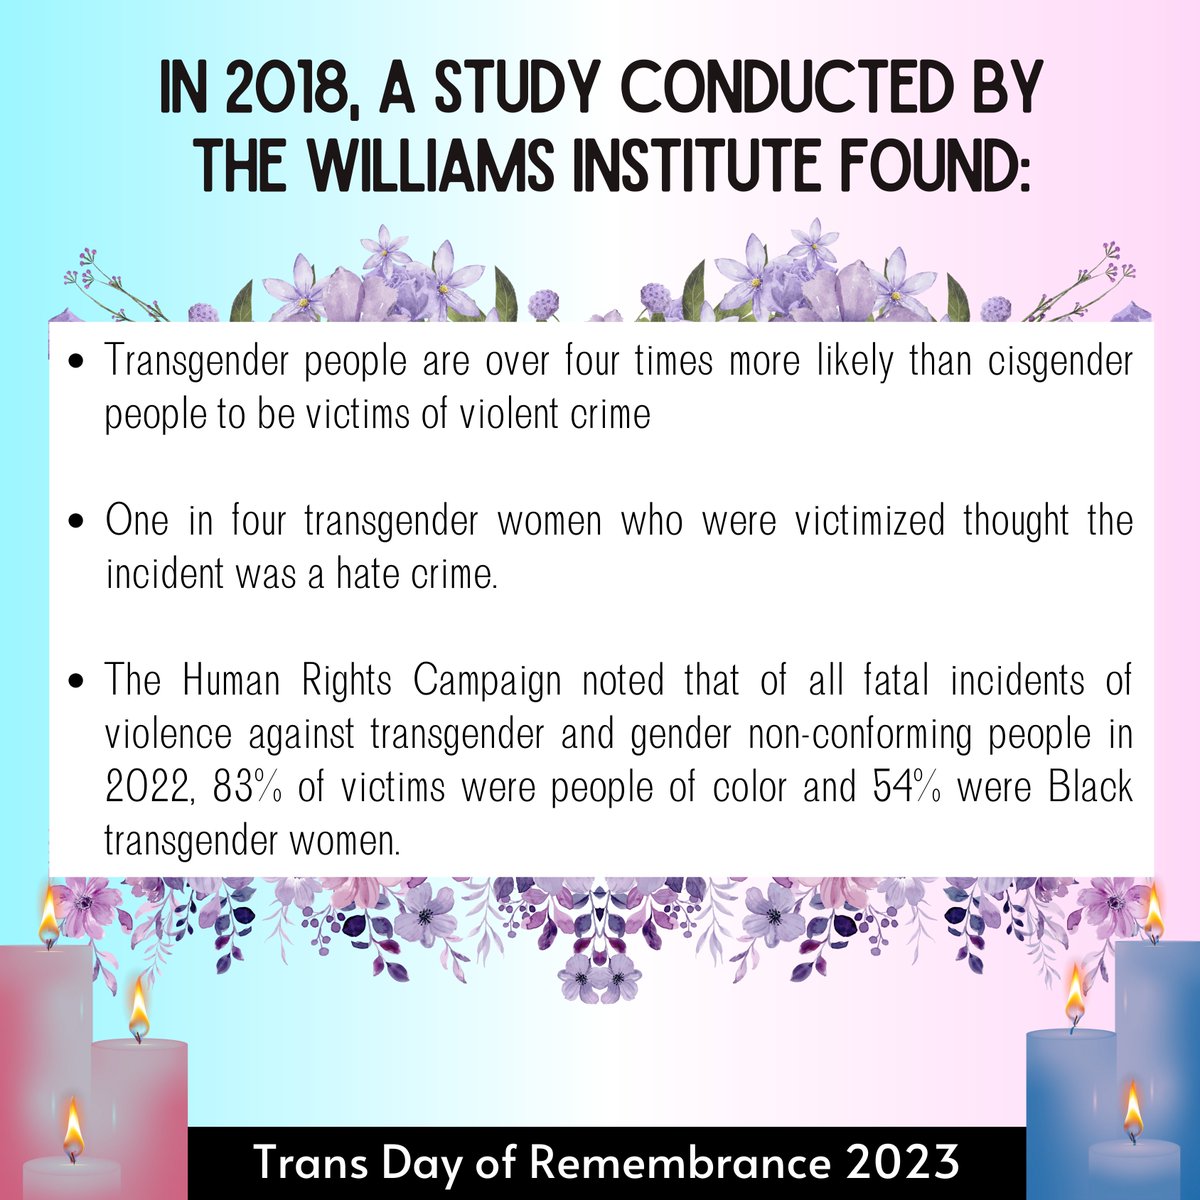 As we approach #tdor2023, we want to draw attention to the high rates of violence towards transgender people. This is likely exacerbated especially now due to the rise of anti-trans legislations, rhetoric, and media barrage.